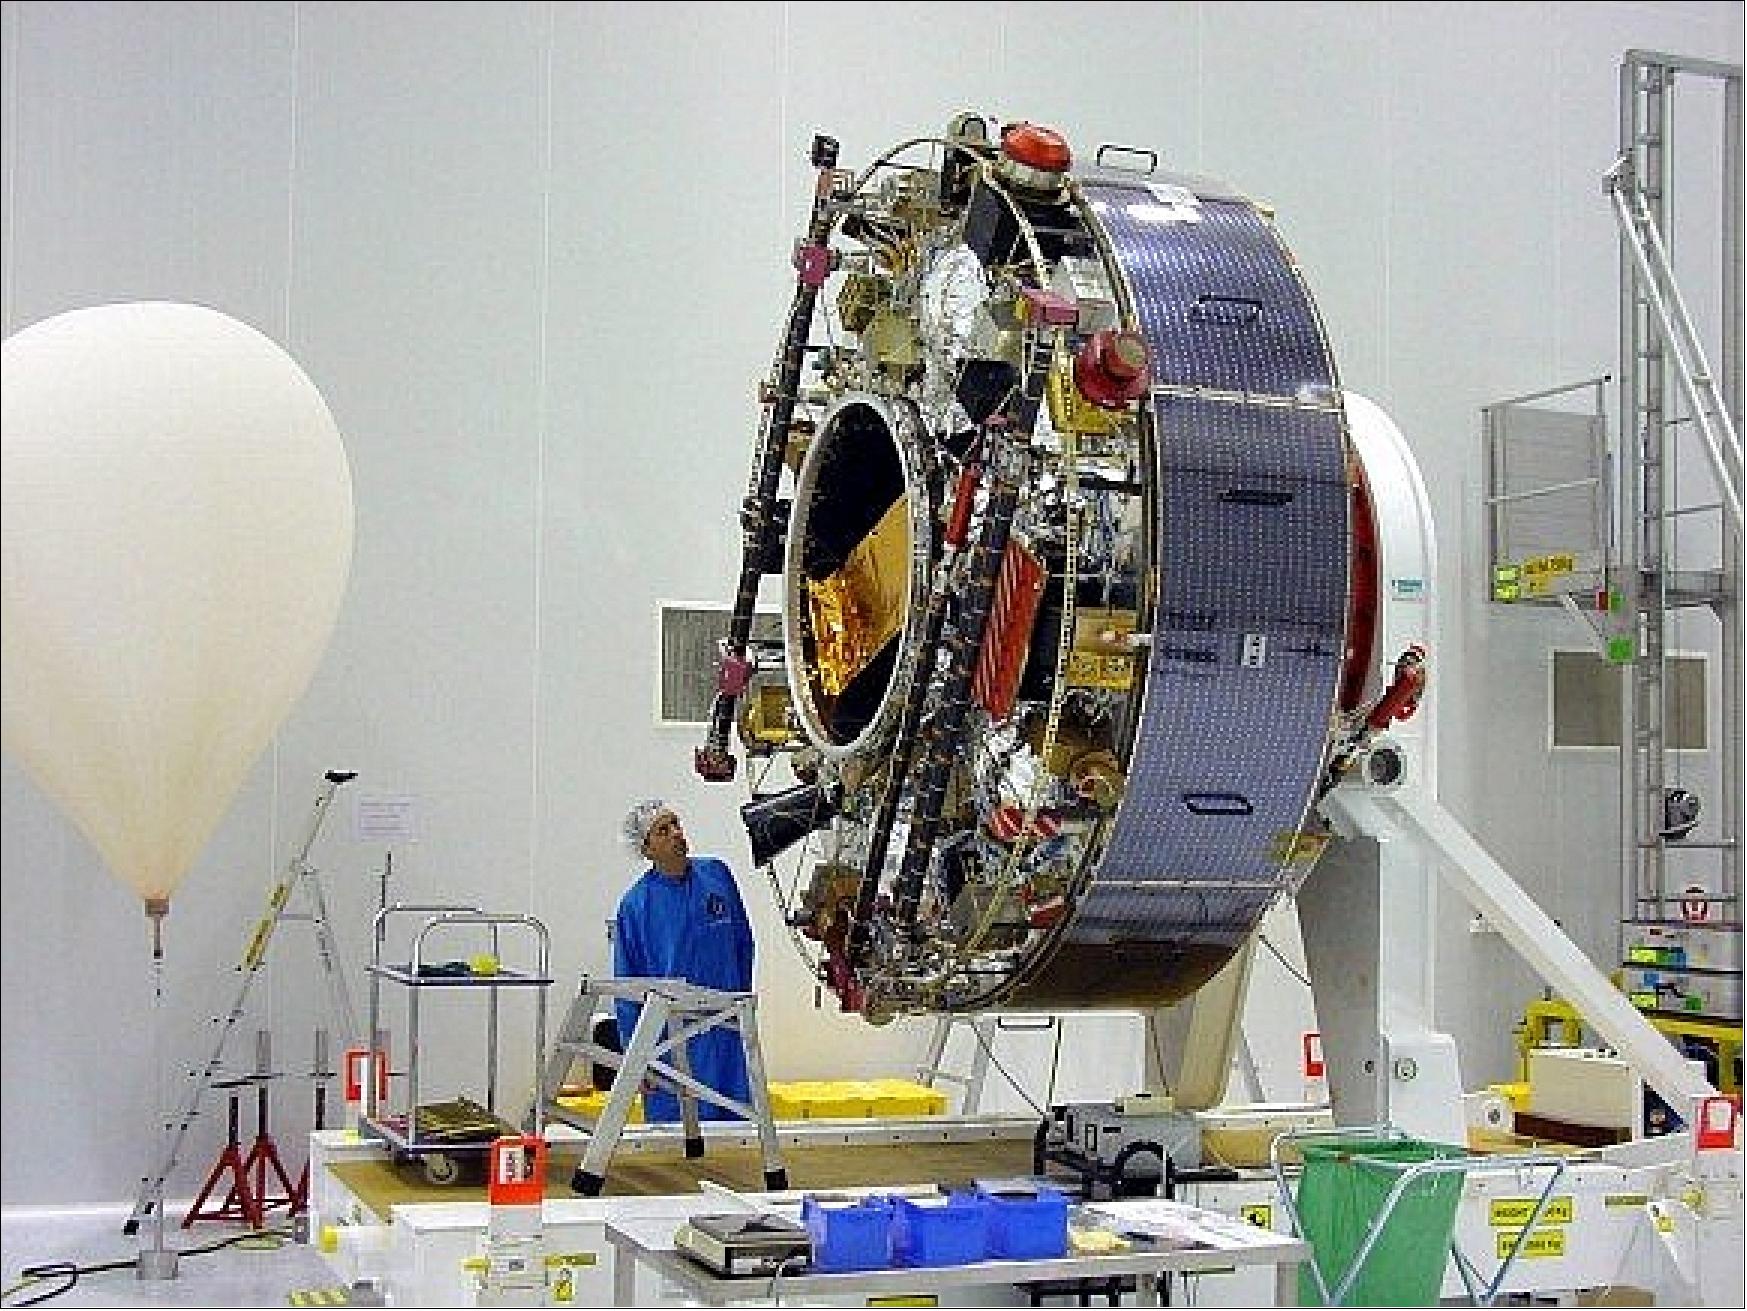 Figure 5: Inspection of one the the four Cluster satellites at ESA (image credit: ESA)